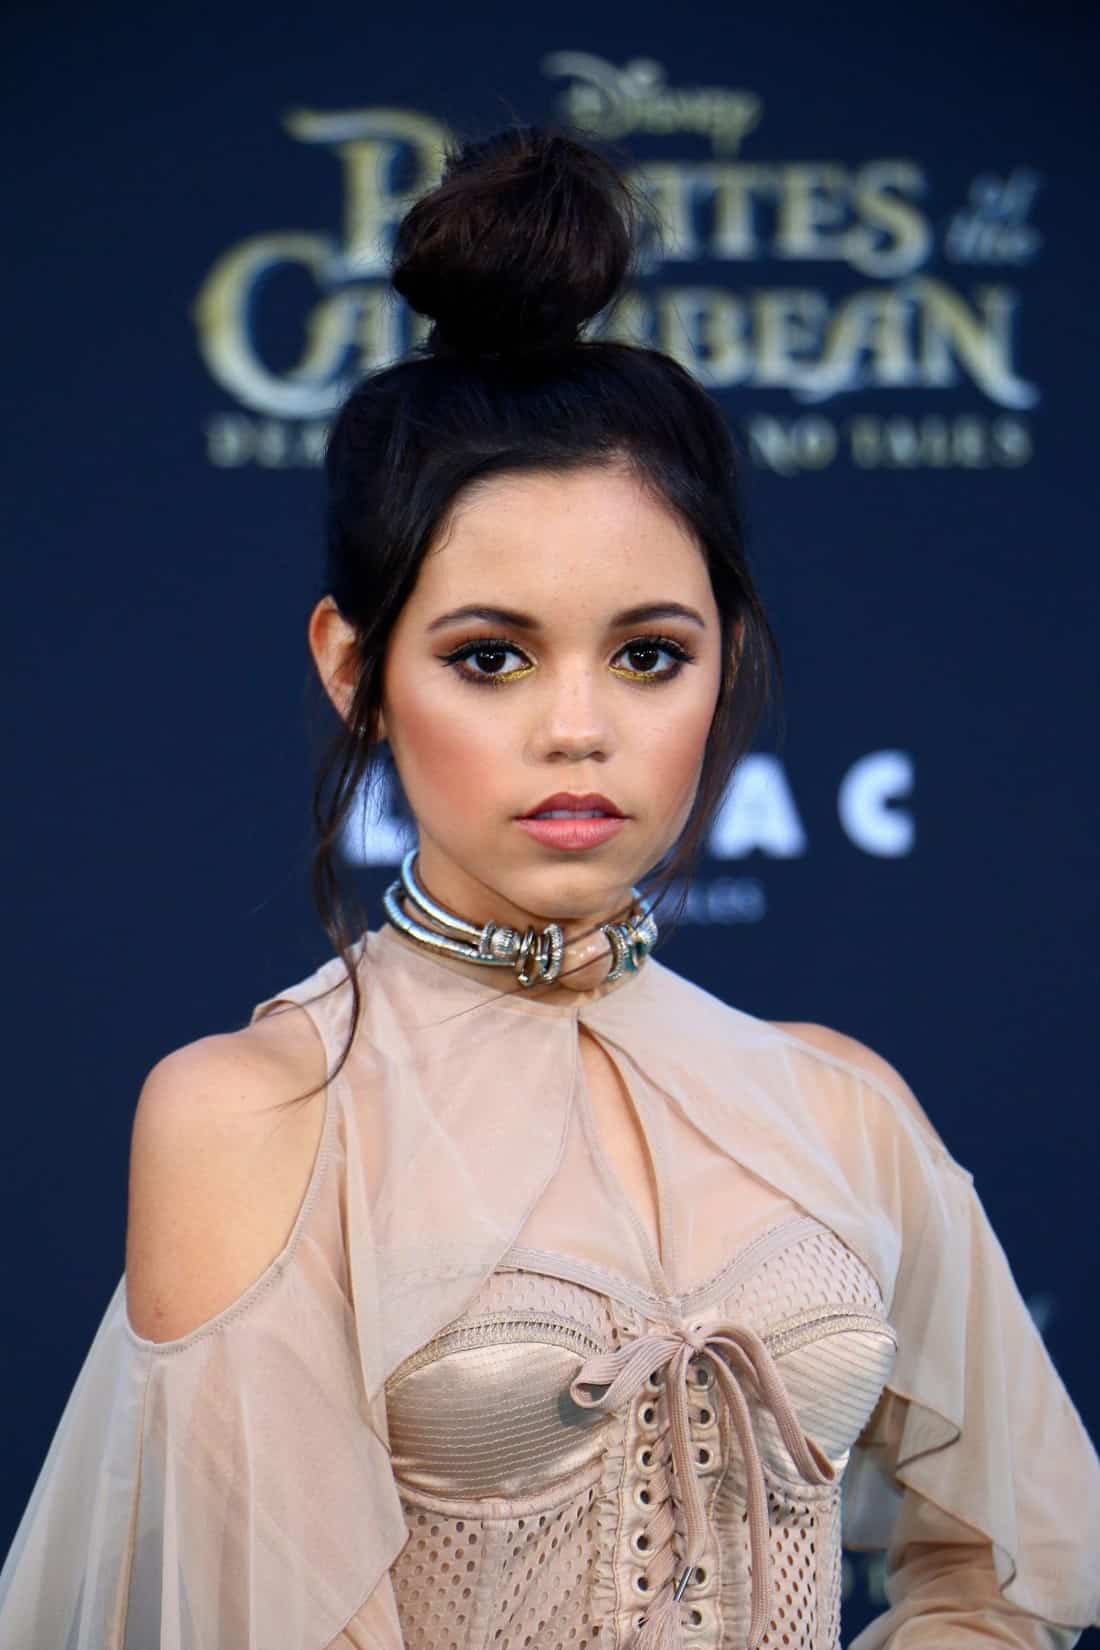 Jenna Ortega Dazzles at Pirates of the Caribbean Premiere with Trendy Outfit